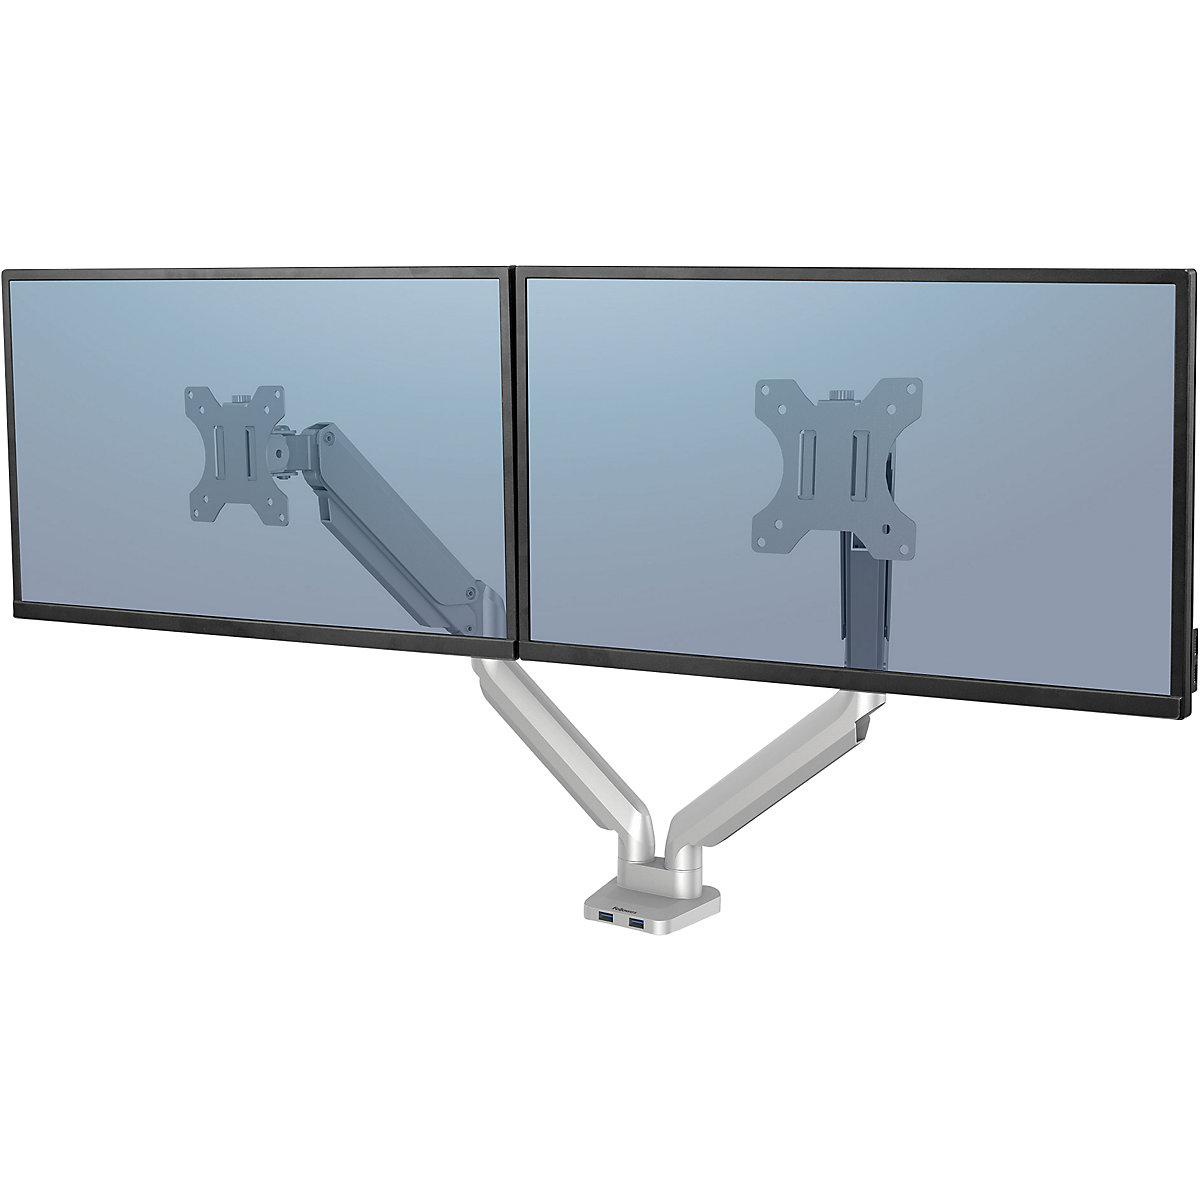 PLATINUM SERIES monitor arm – Fellowes: double arm for 2 monitors